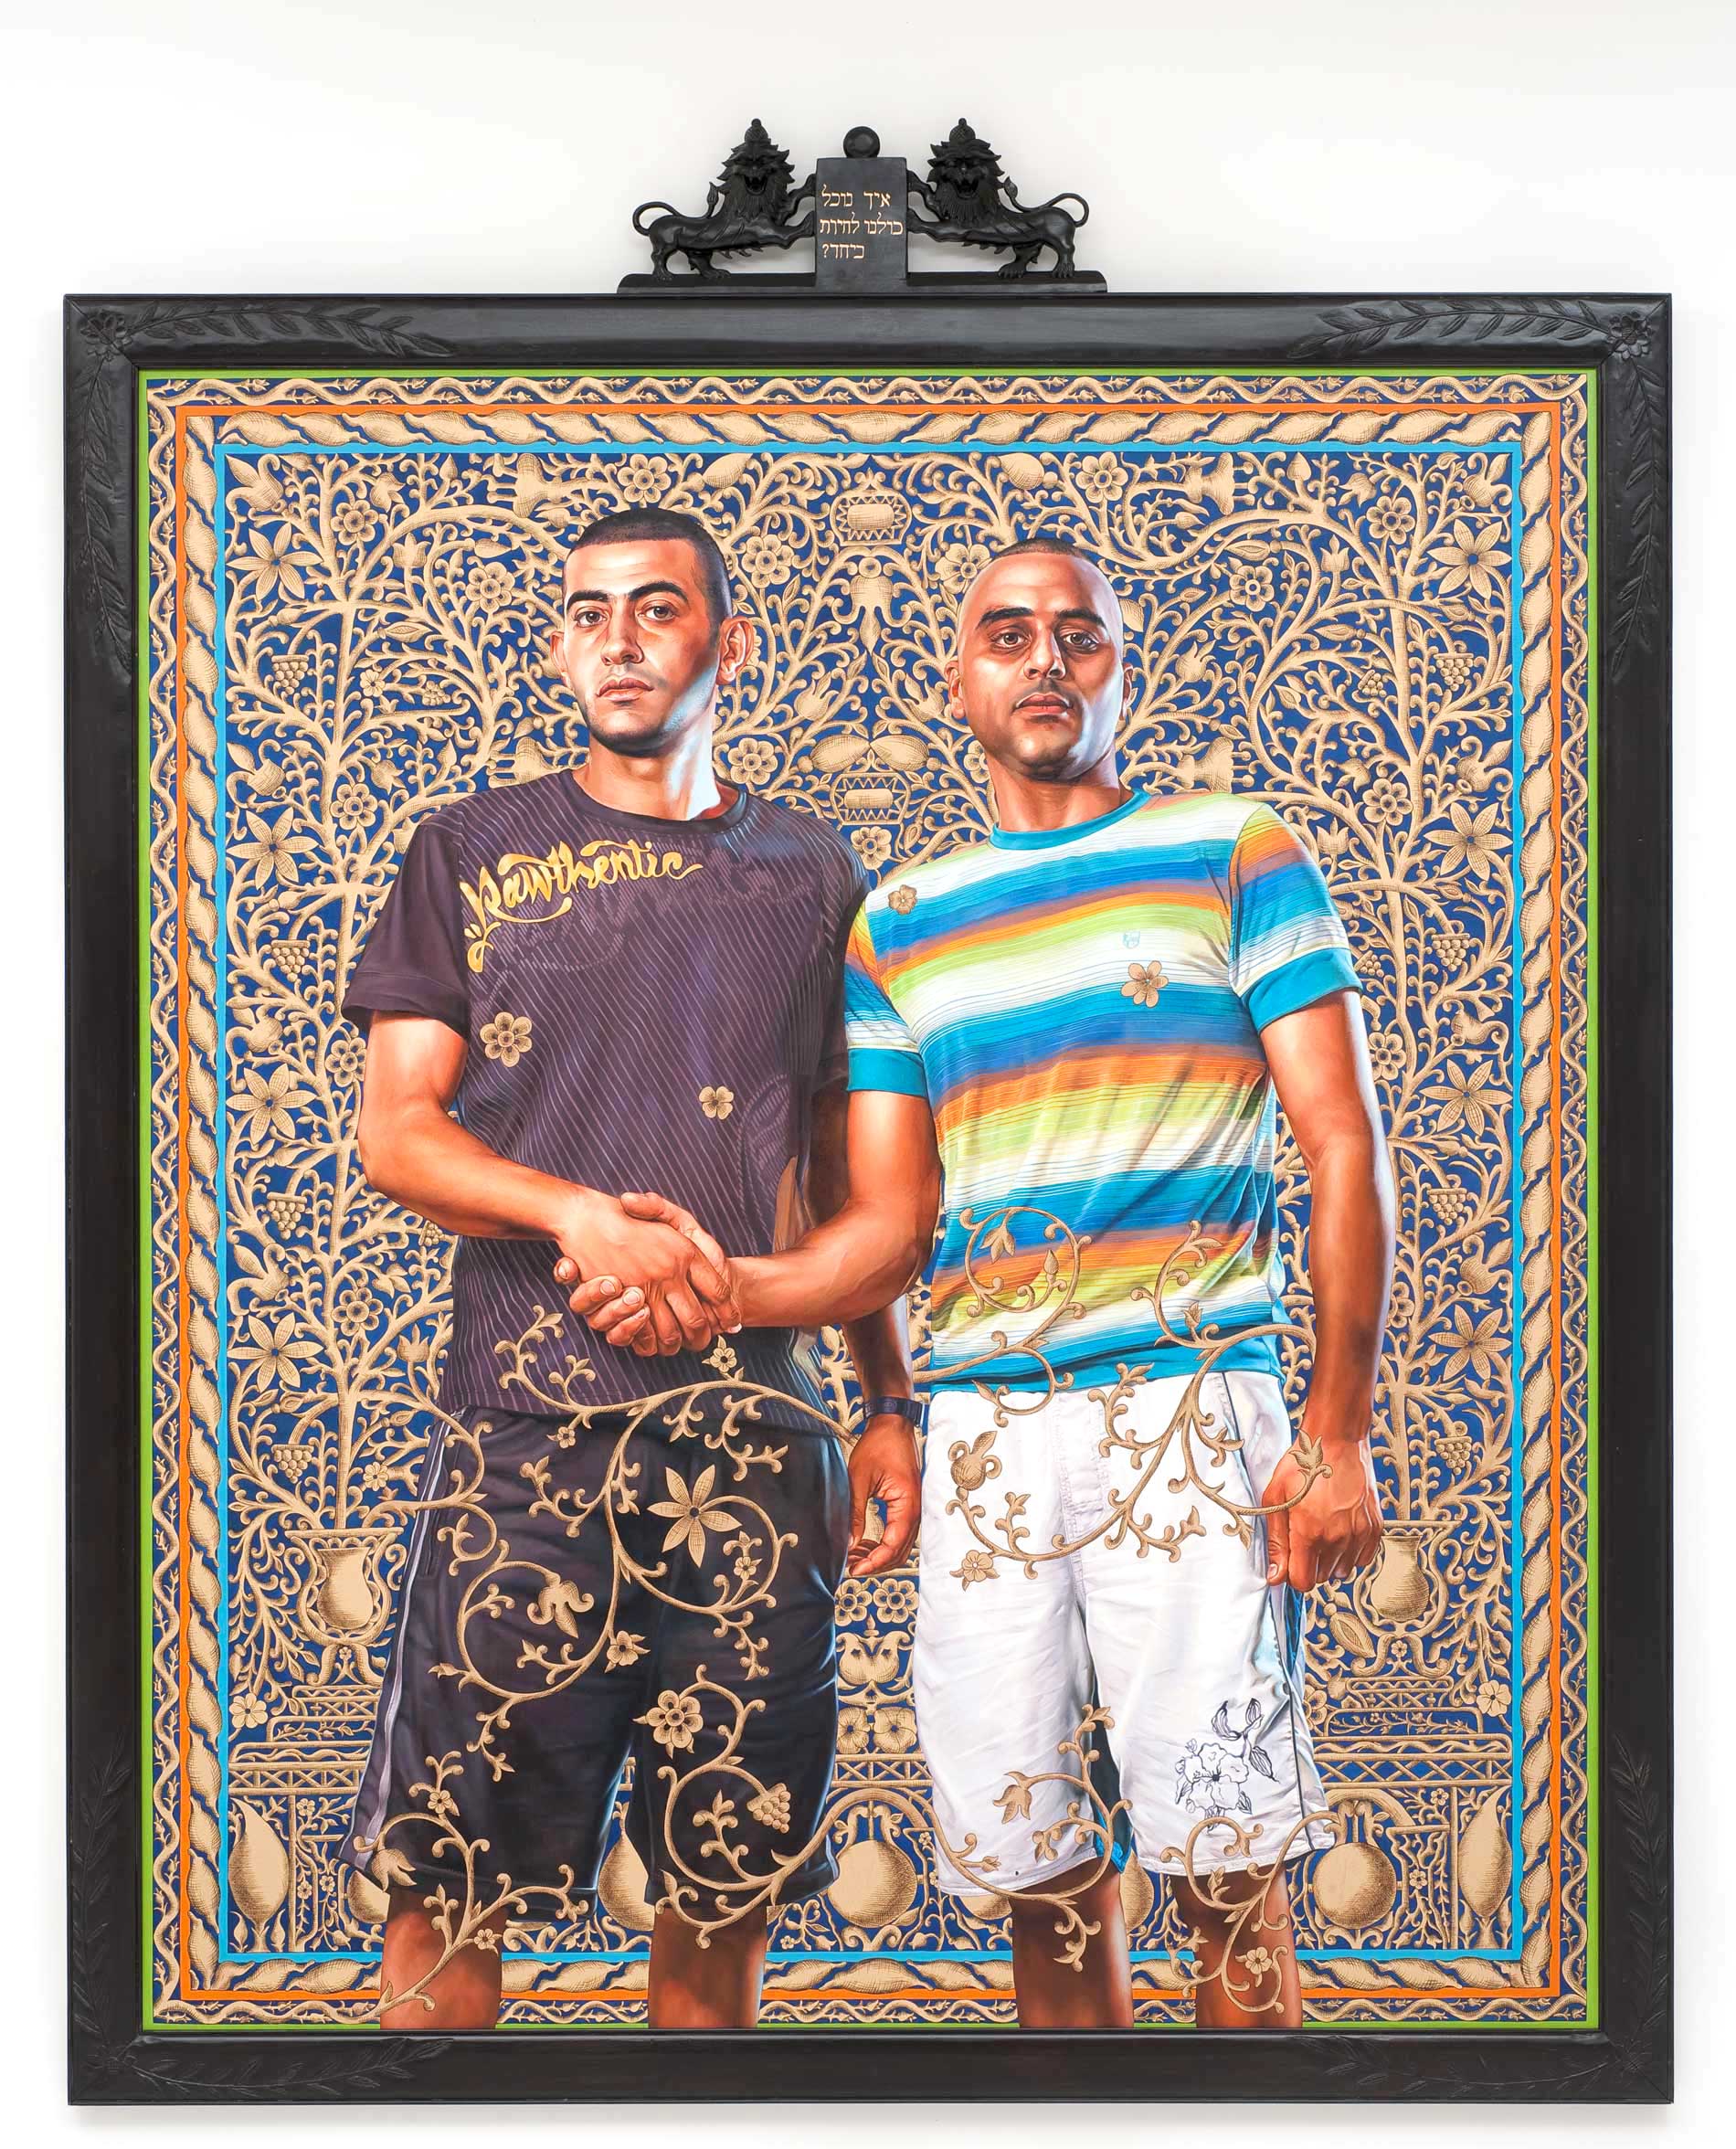 Kehinde Wiley | The World Stage: Israel | Abed Al Ashe and Chaled El Awari, 2011 Oil and Enamel on Canvas. | 1